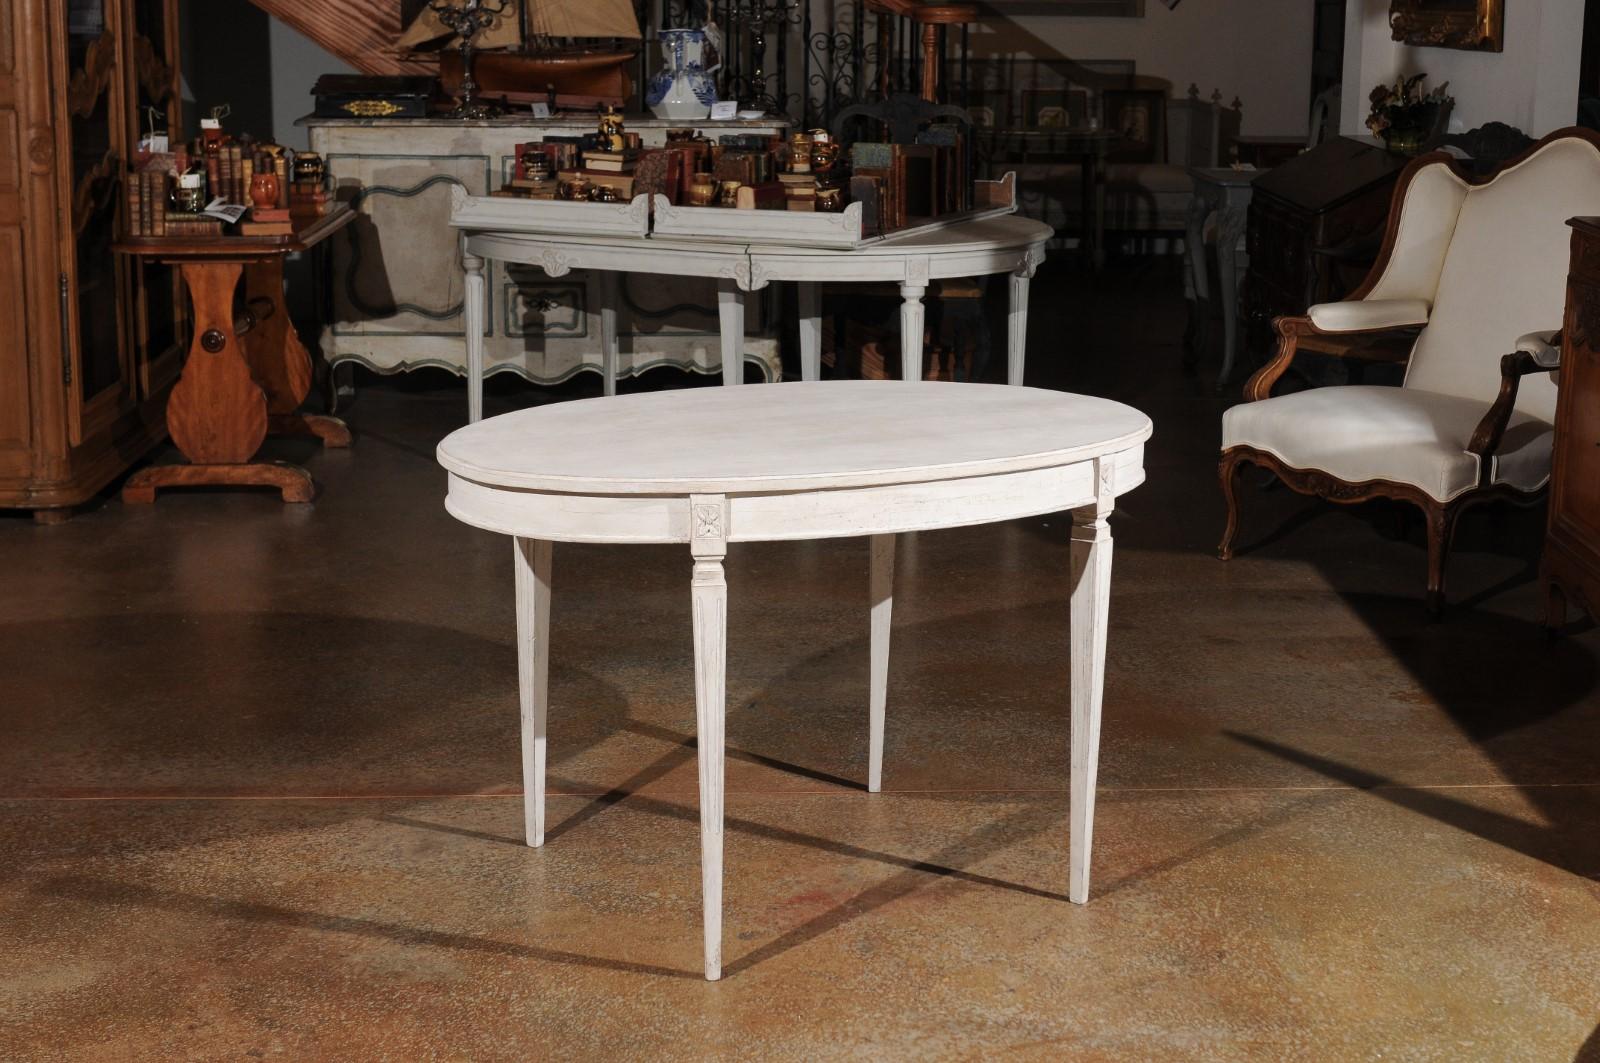 Carved Swedish Gustavian Style Painted Wood Oval Table with Tapered Legs, circa 1880